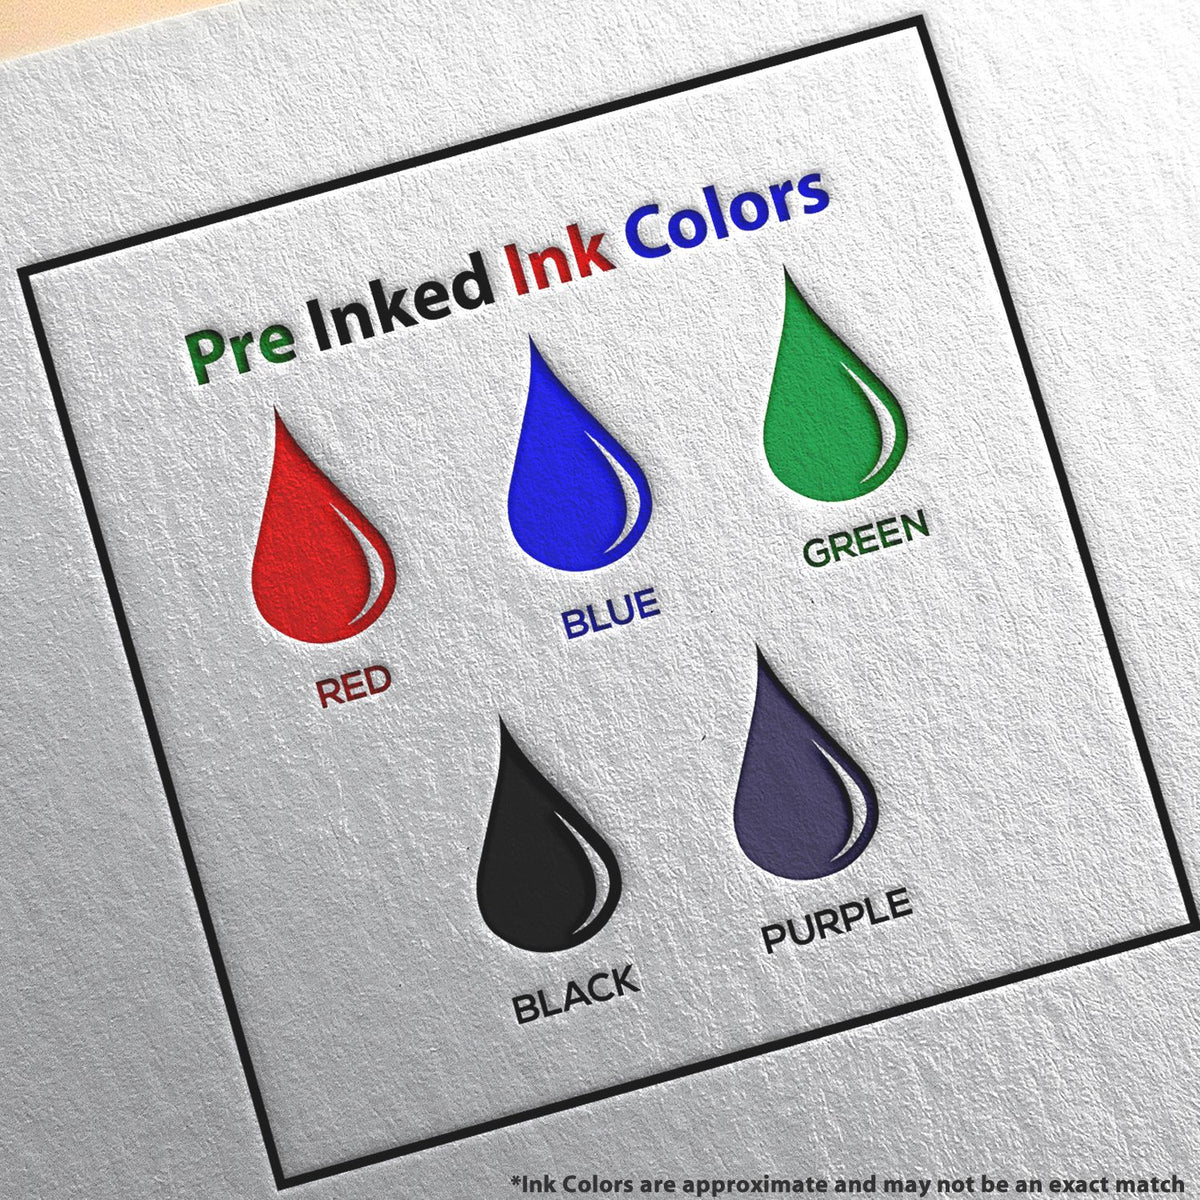 A picture showing the different ink colors or hues available for the MaxLight Premium Pre-Inked New Mexico State Seal Notarial Stamp product.